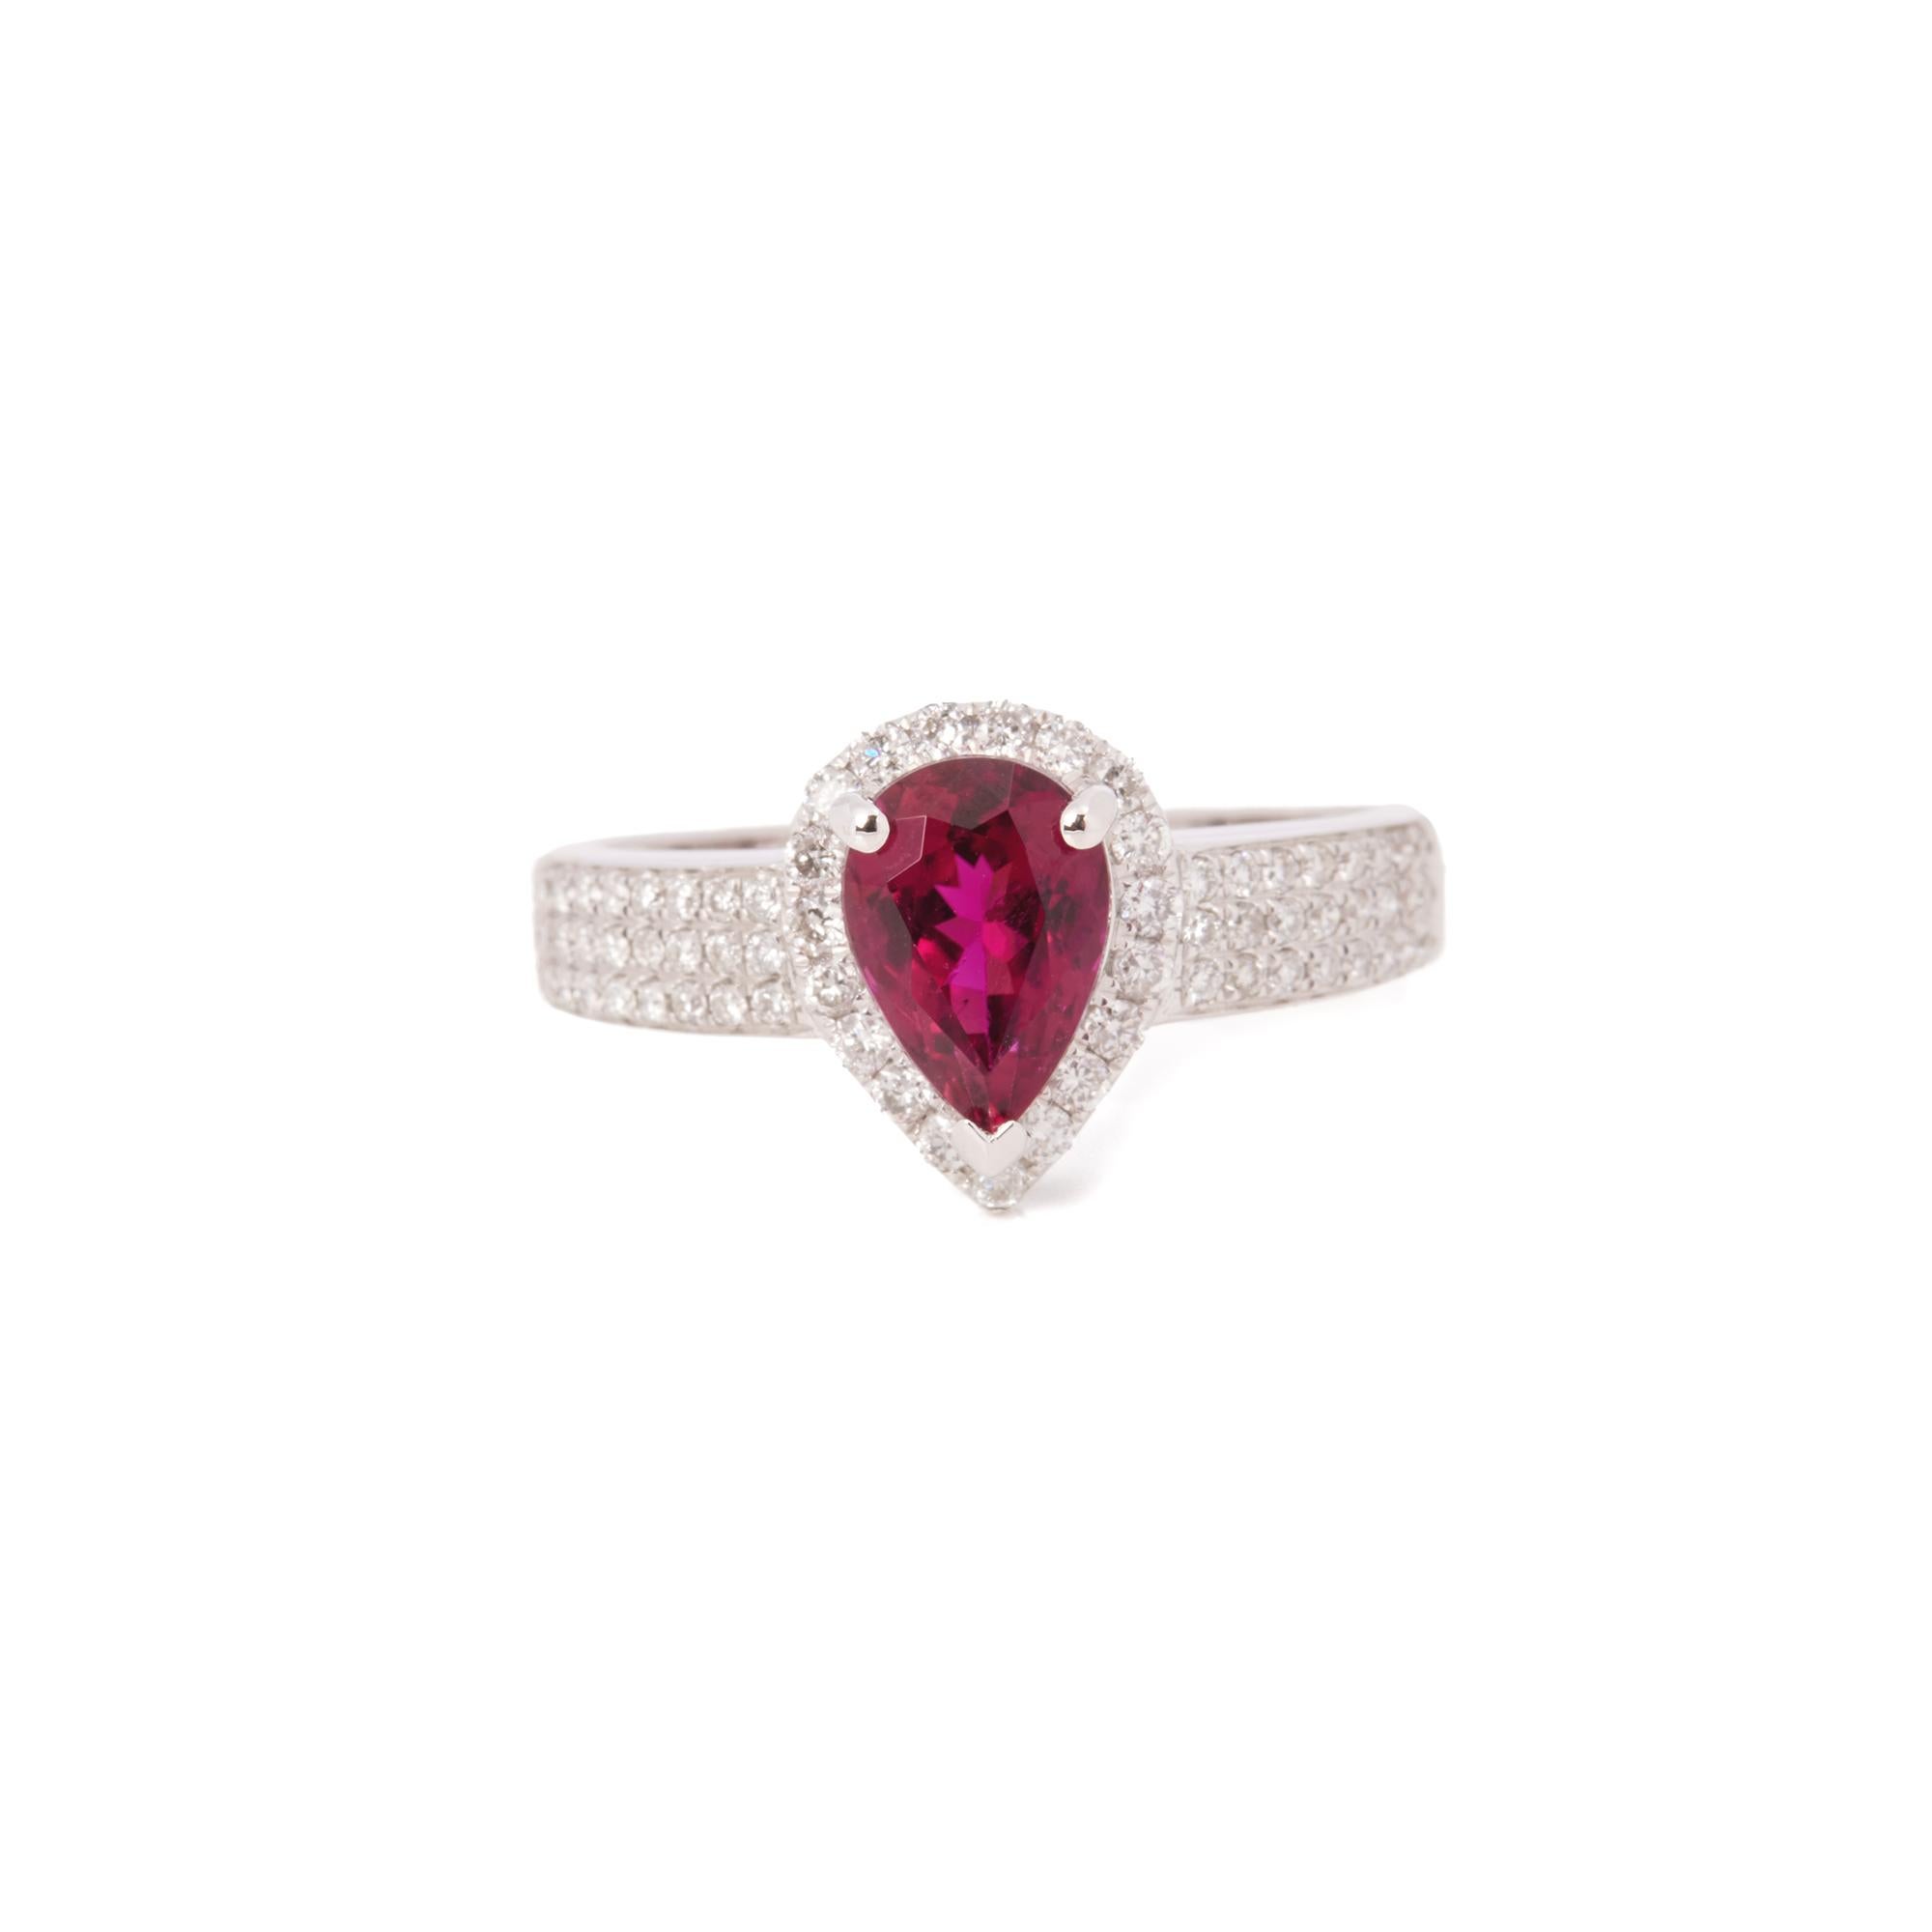 This ring is from the private collection of gemstone jewellery individually designed by David Jerome. It features a pear cut rubellite tourmaline set with diamonds. Accompanied by an IGR gem certificate. UK ring size N. EU ring size 54. US ring size